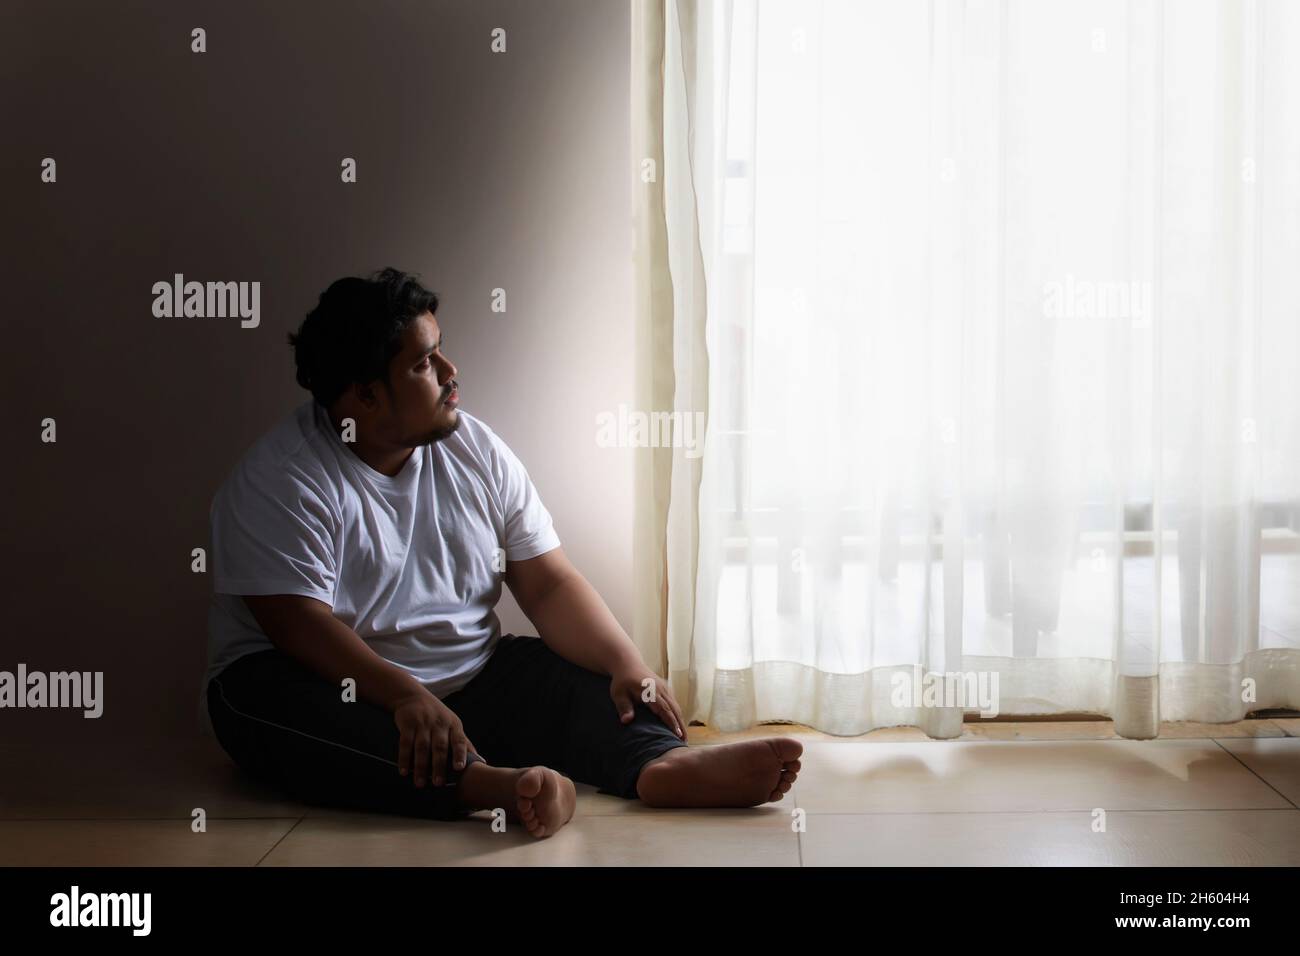 A fat man sitting sadly looking at the curtains in his room. Stock Photo